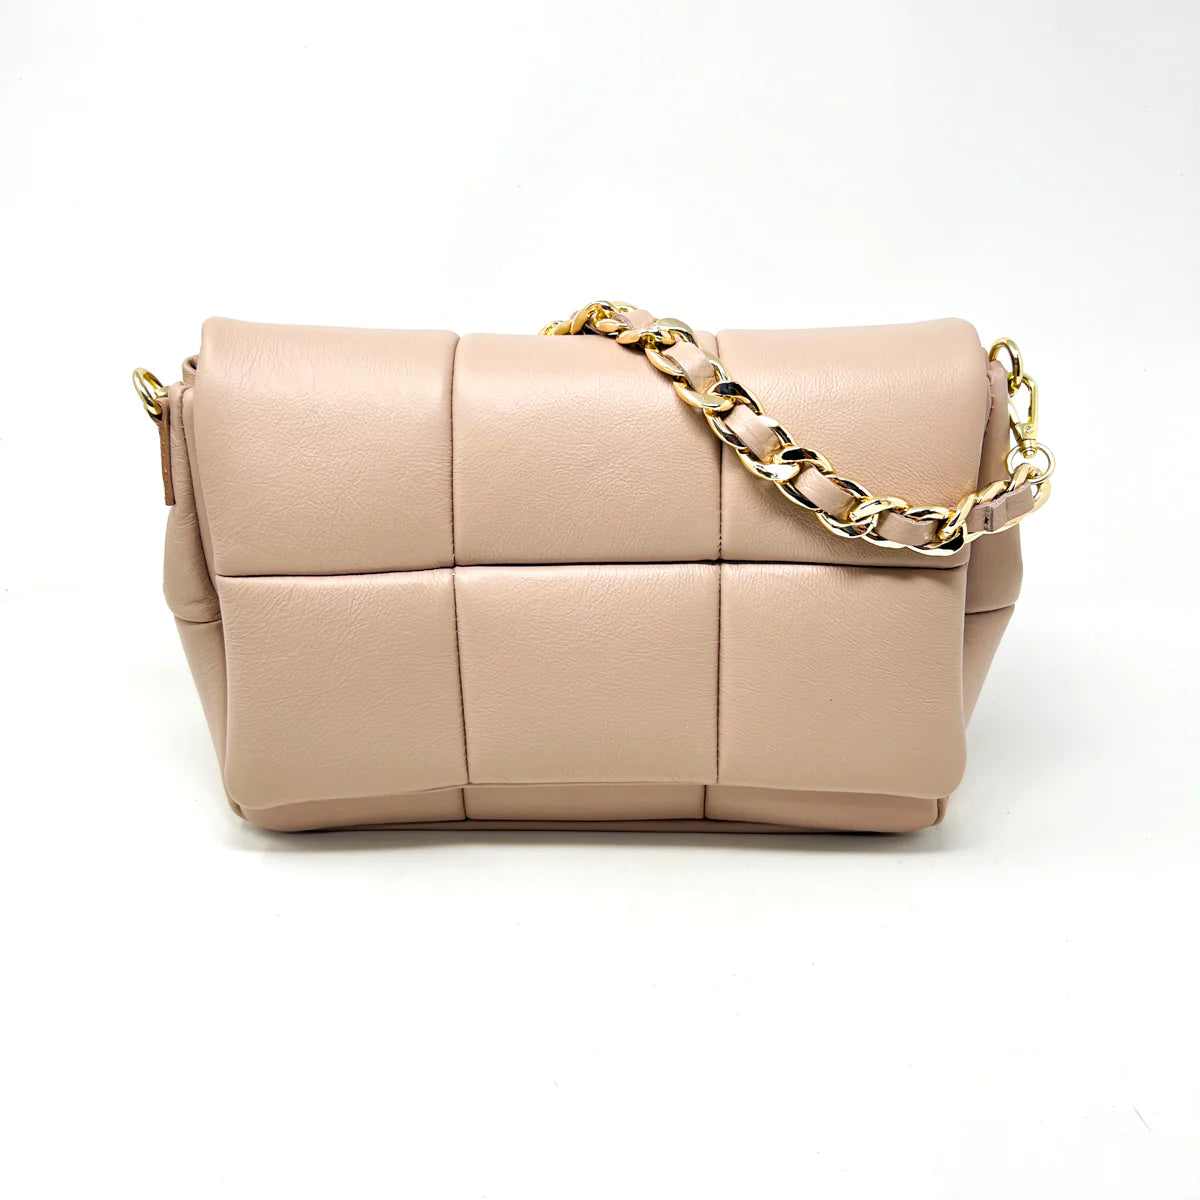 Nude Quilted Bag